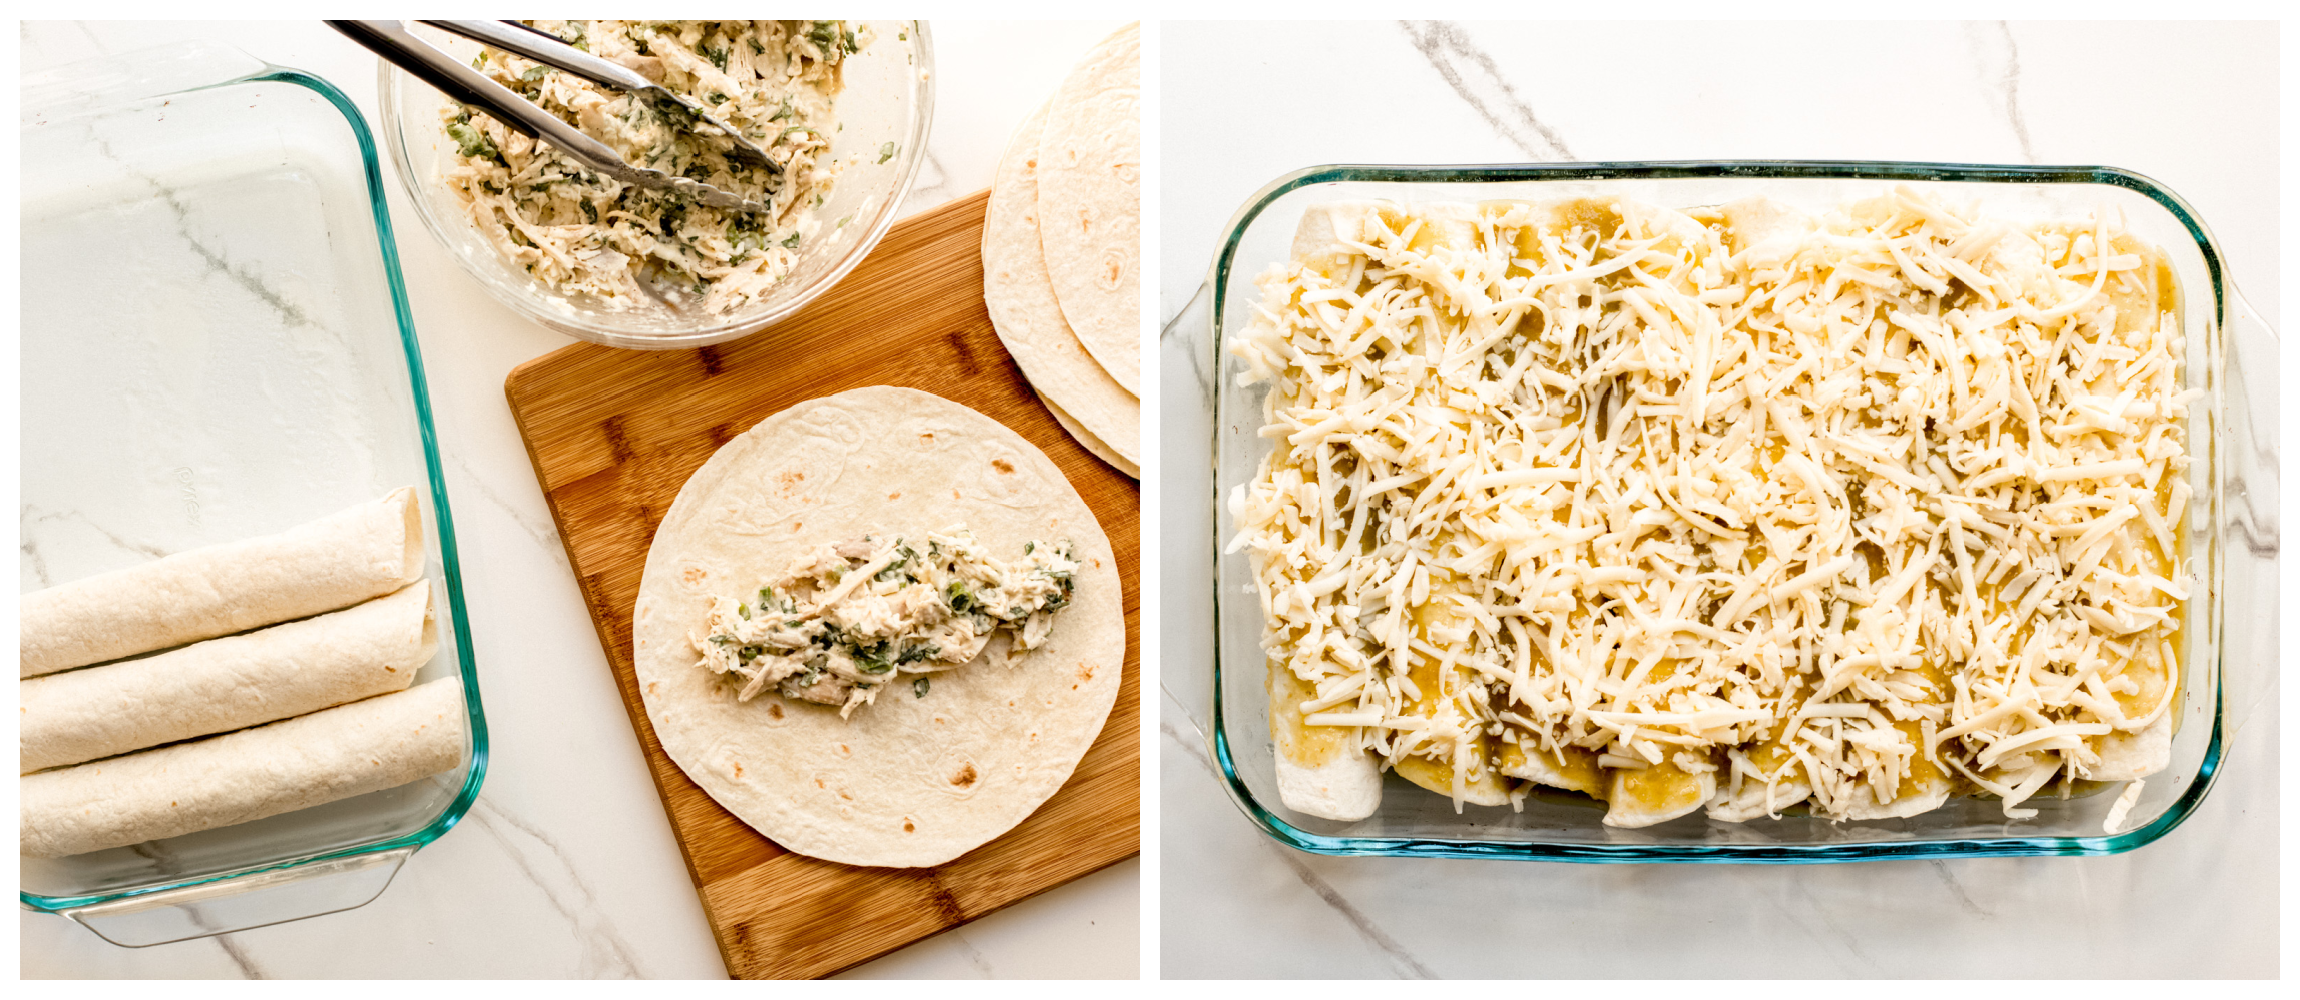 two photos, showing tortillas with chicken filling on a wooden cutting boards in one, and rolled up enchiladas with sprinkled cheese in baking dish in second.